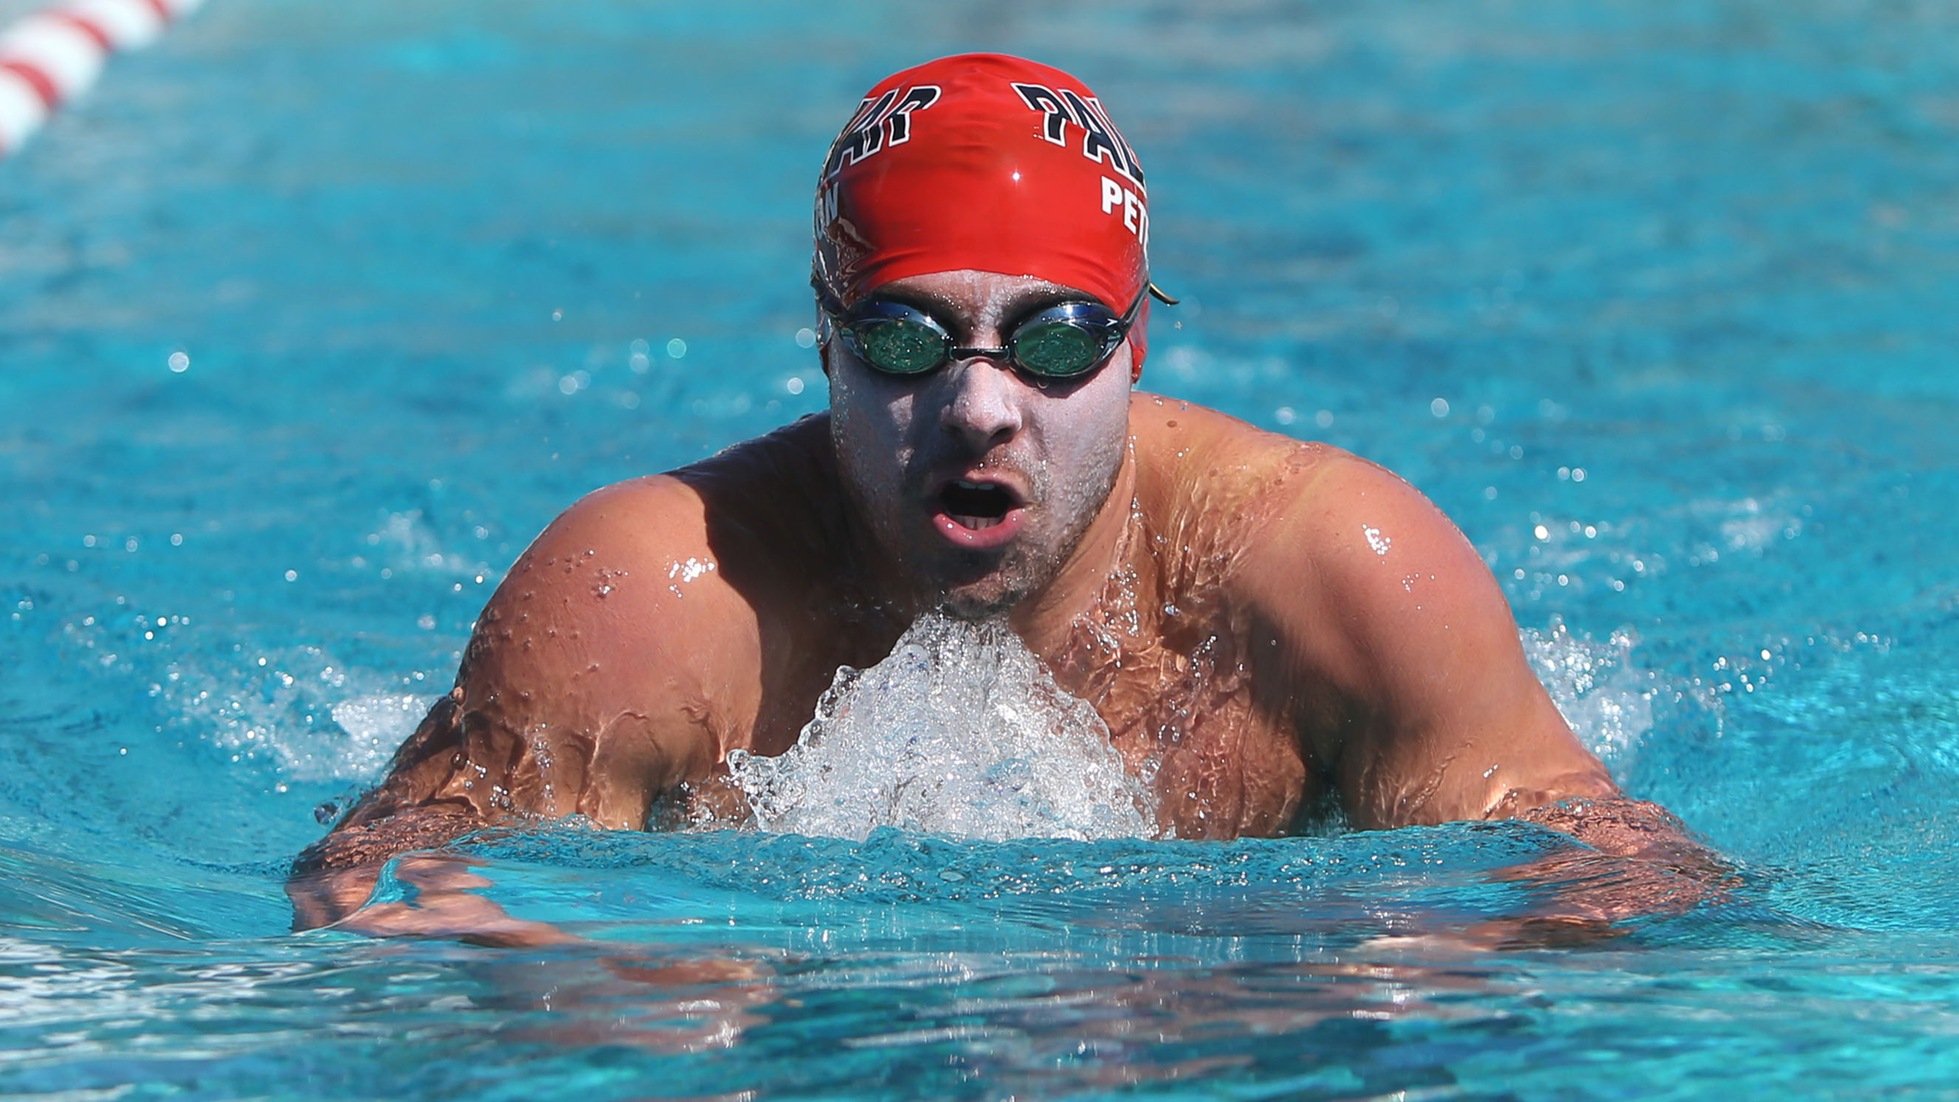 George Peterson placed first in Event 30 Men 200 Yard IM with a time of 2:06.25. Photo by Hugh Cox.